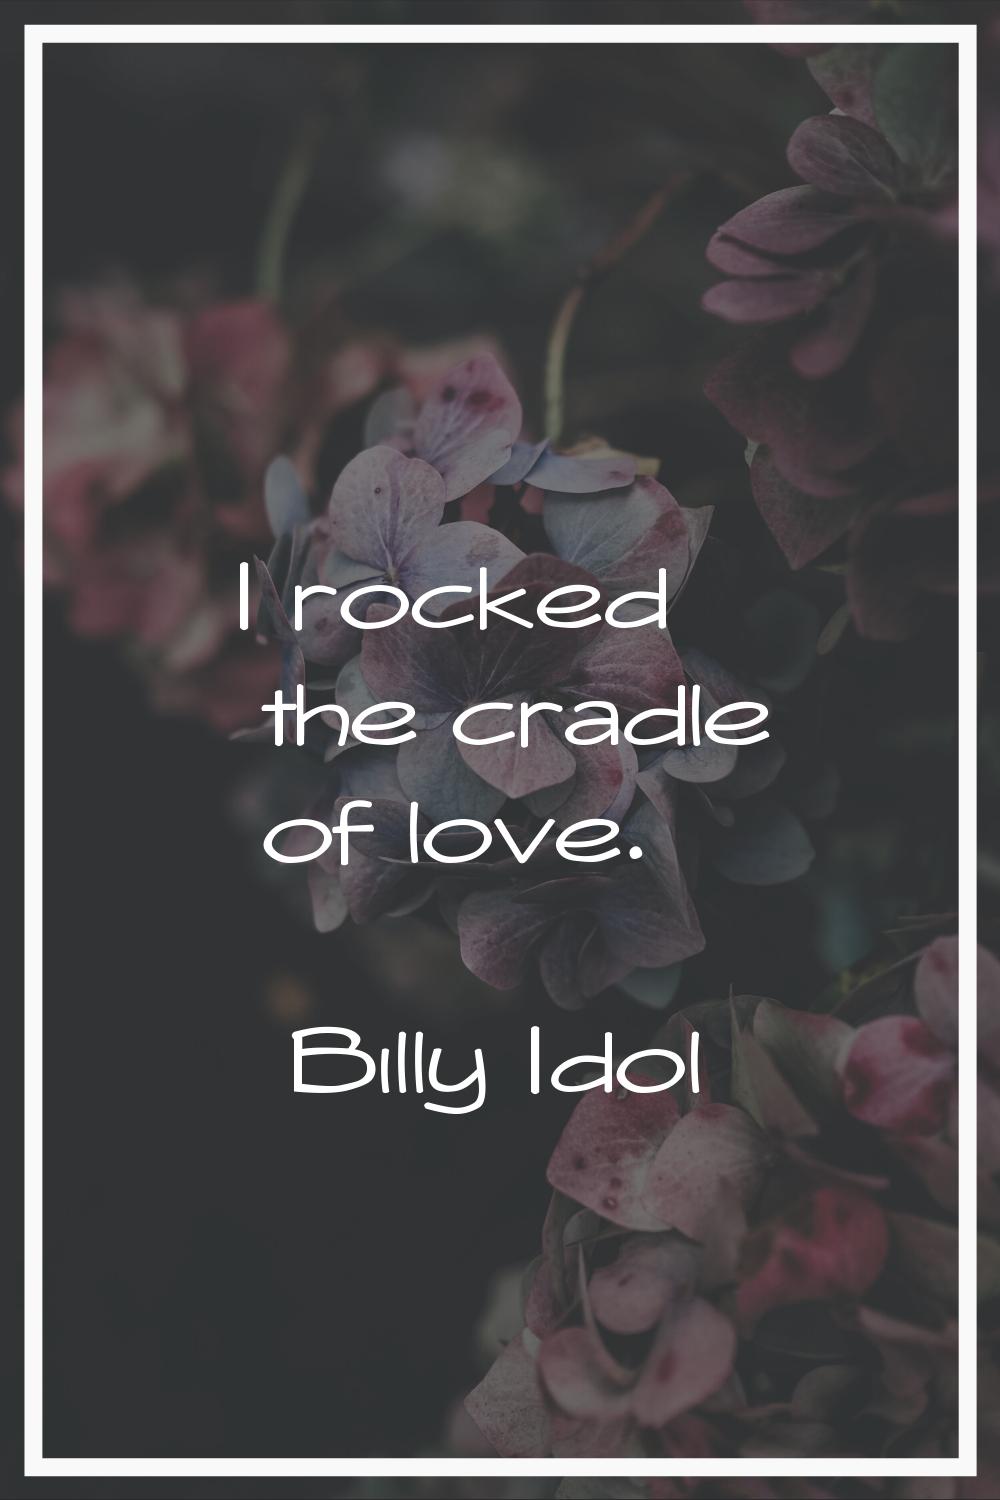 I rocked the cradle of love.